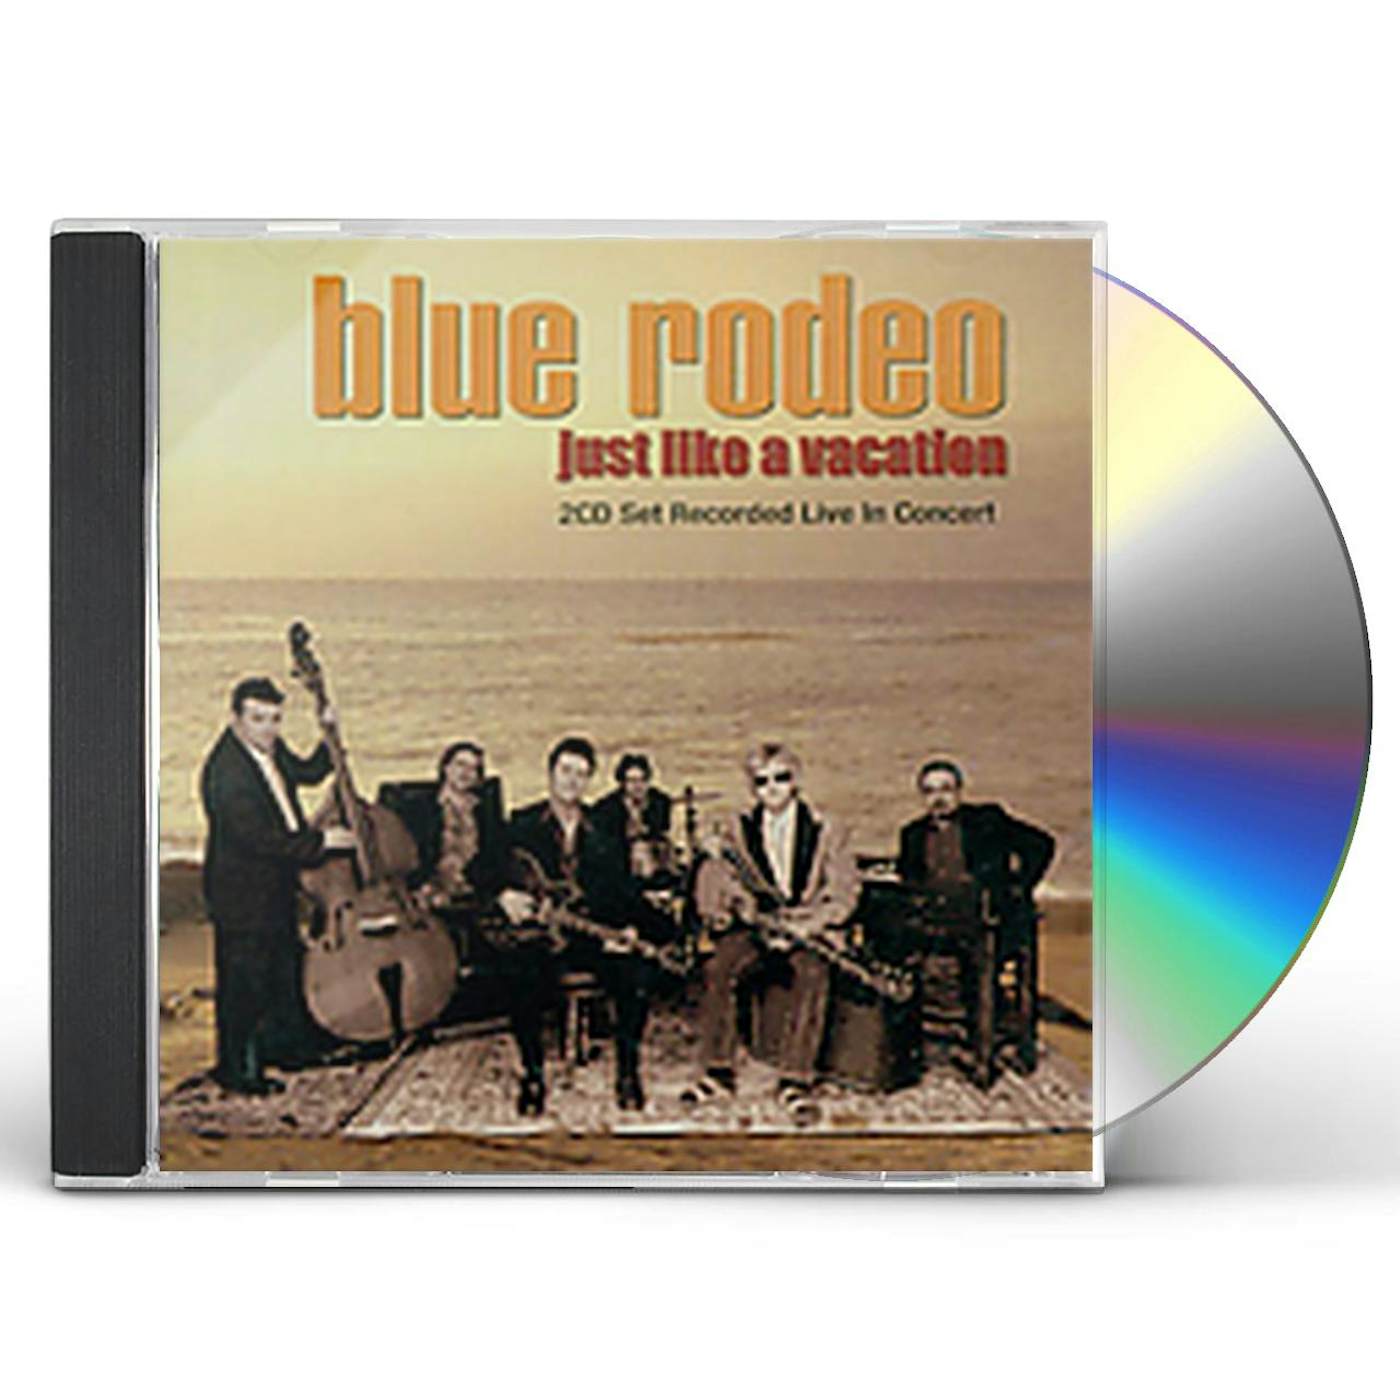 Blue Rodeo JUST LIKE A VACATION CD